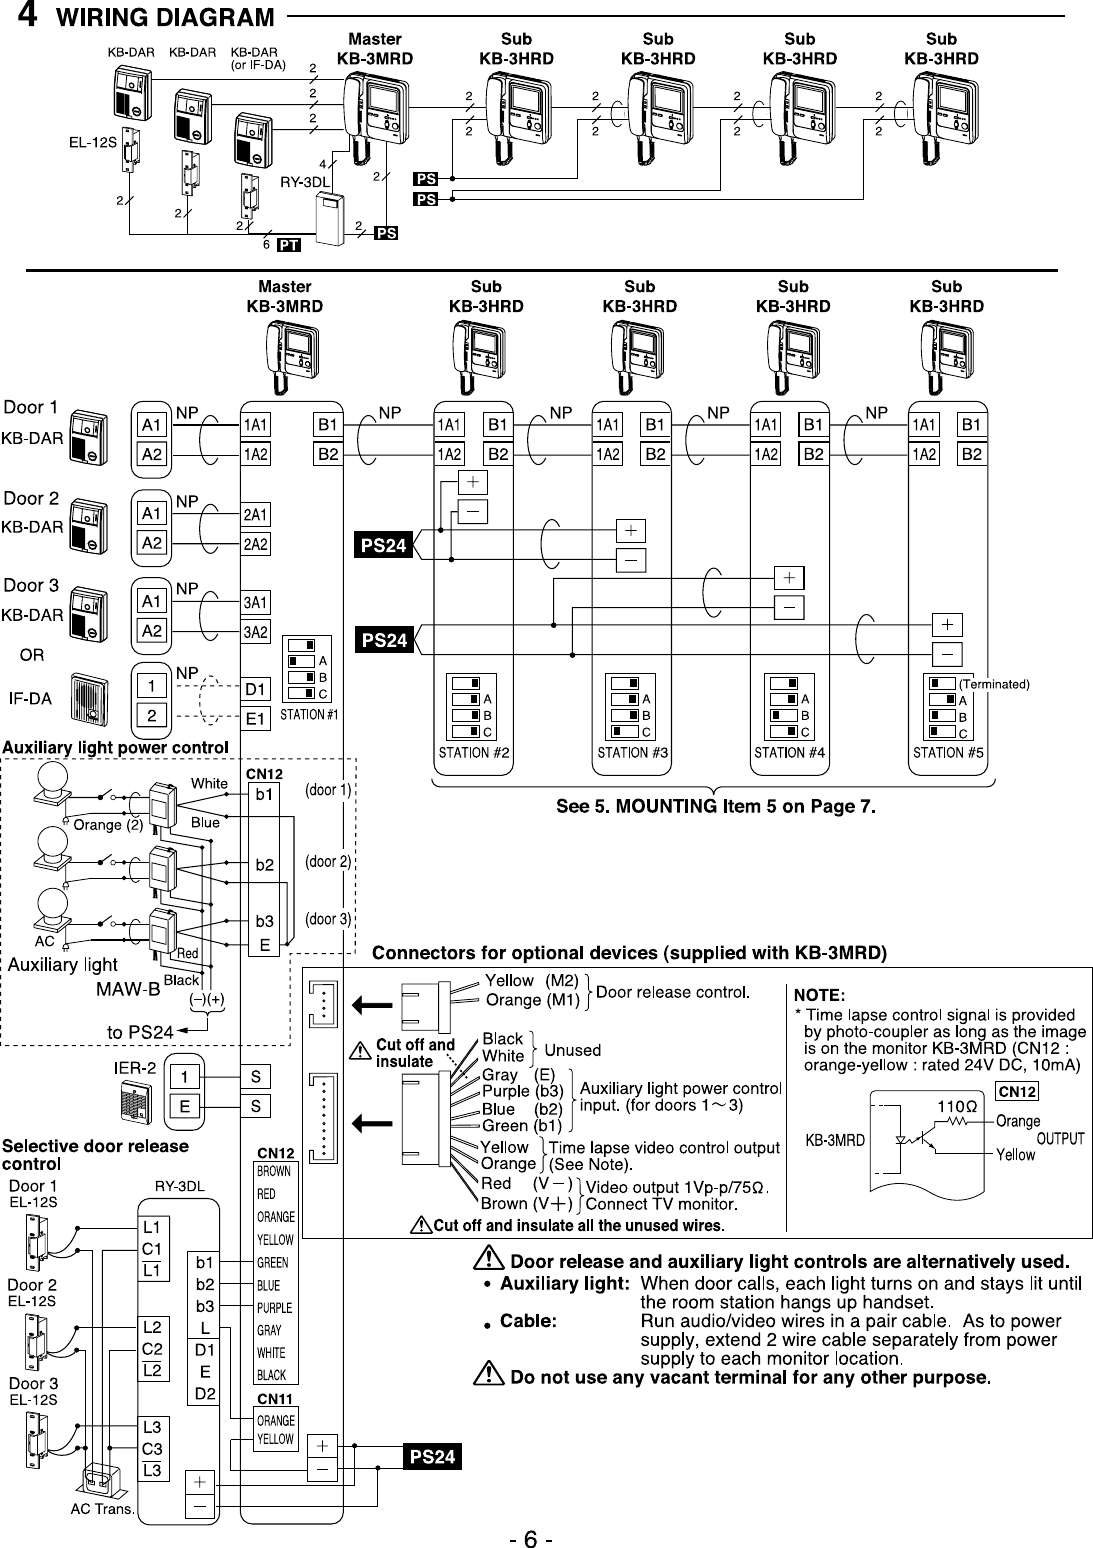 Page 6 of 8 - Aiphone Aiphone-Kb-3Hrd-Users-Manual-  Aiphone-kb-3hrd-users-manual